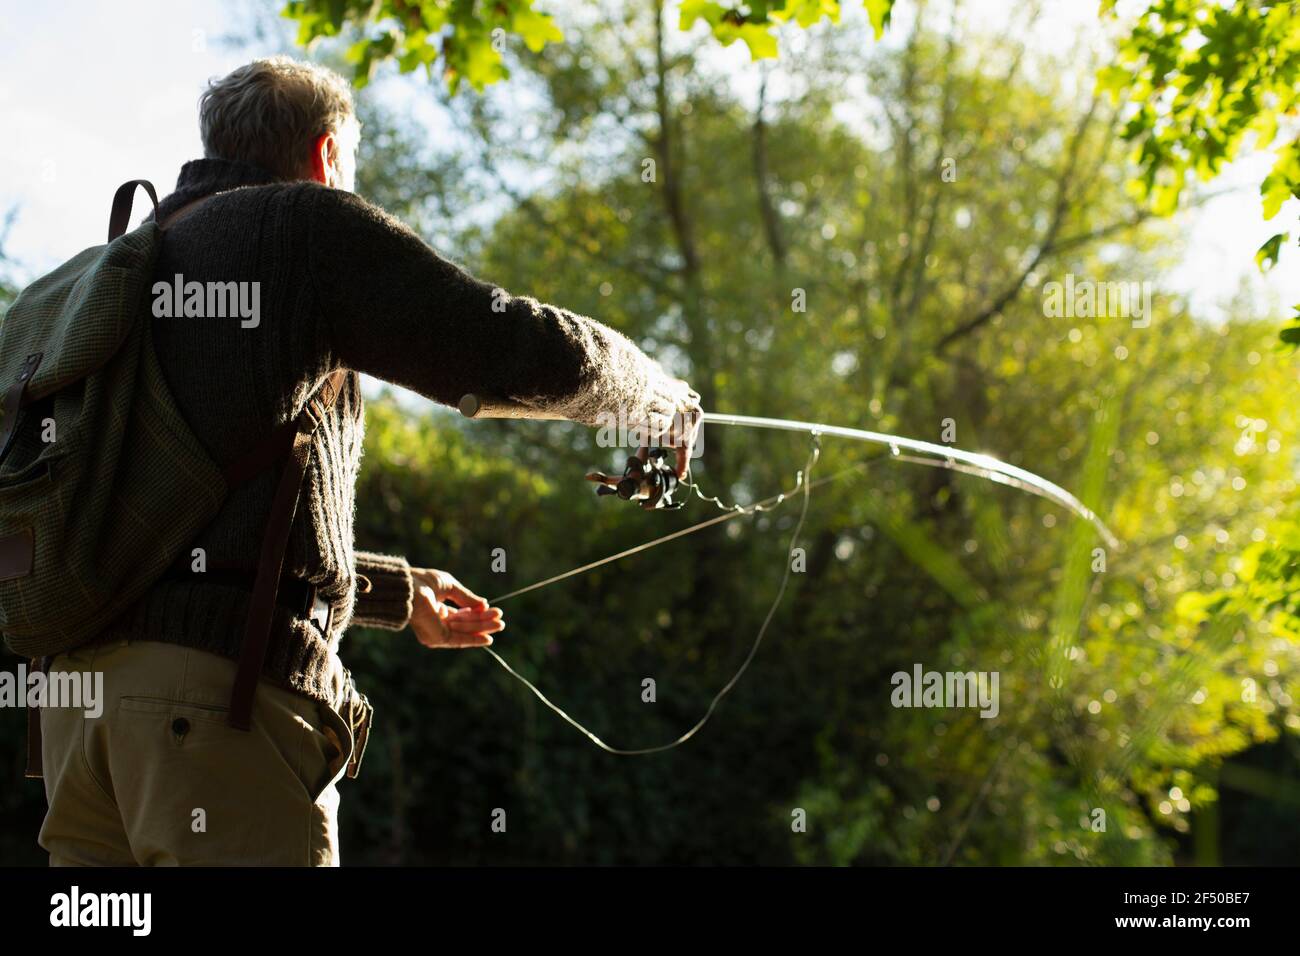 https://c8.alamy.com/comp/2F50BE7/man-with-backpack-casting-fly-fishing-pole-below-sunny-trees-2F50BE7.jpg